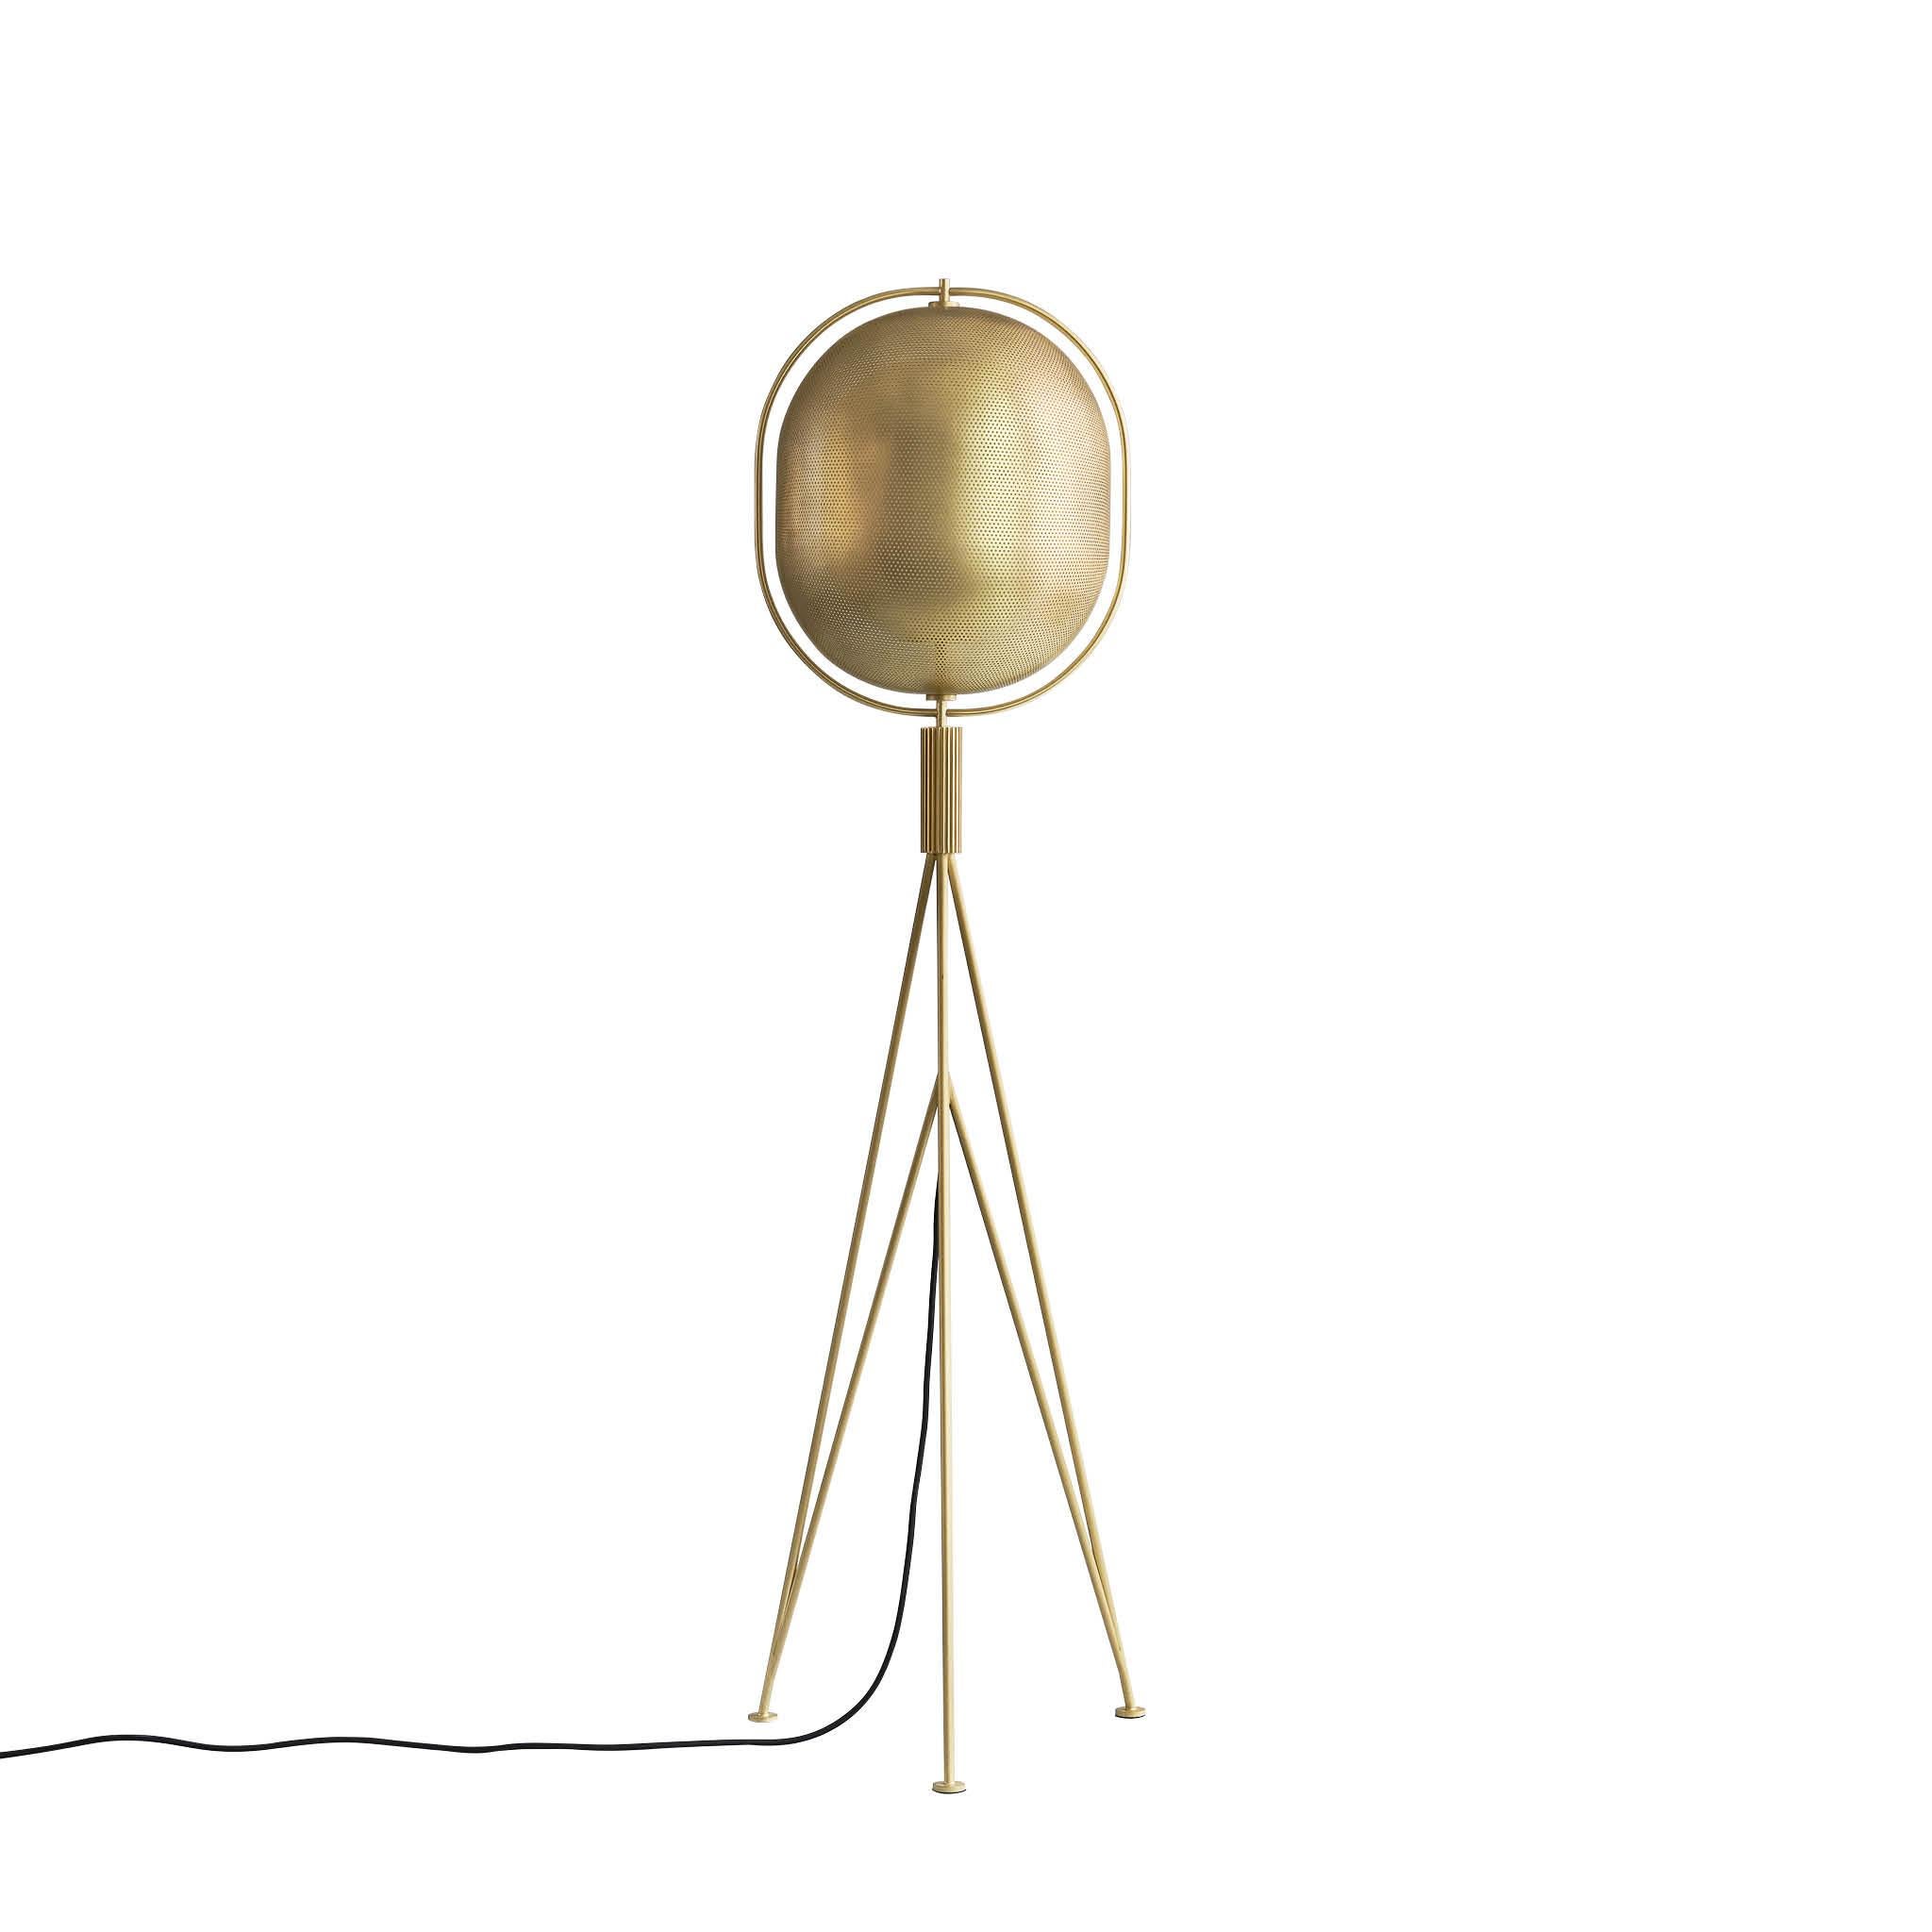 Pearl floor lamp by 101 Copenhagen
Designed by Kristian Sofus Hansen & Tommy Hyldahl.
Dimensions: L 40 x W 39 x H 140 cm
Cable length: 350 cm.

Materials: All metal parts incl. frame, lampshade, ceiling cup, screws etc. are made of 100% iron.